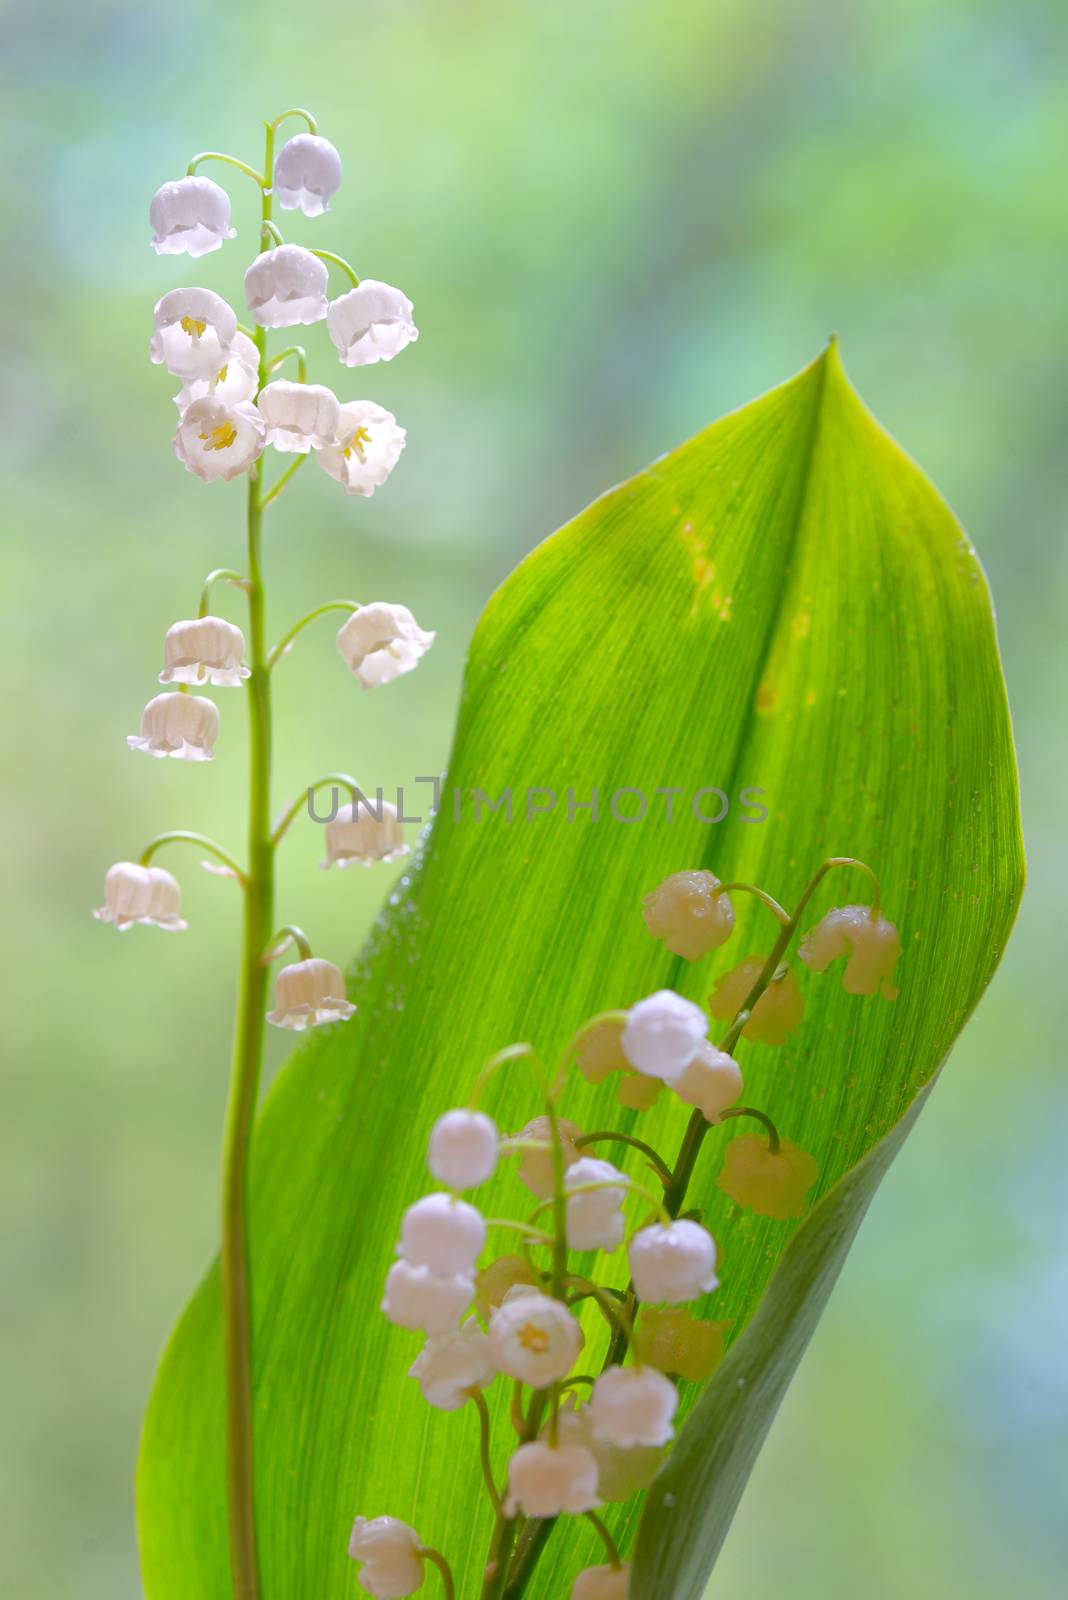 lilies of the valley flowers isolated  by mady70